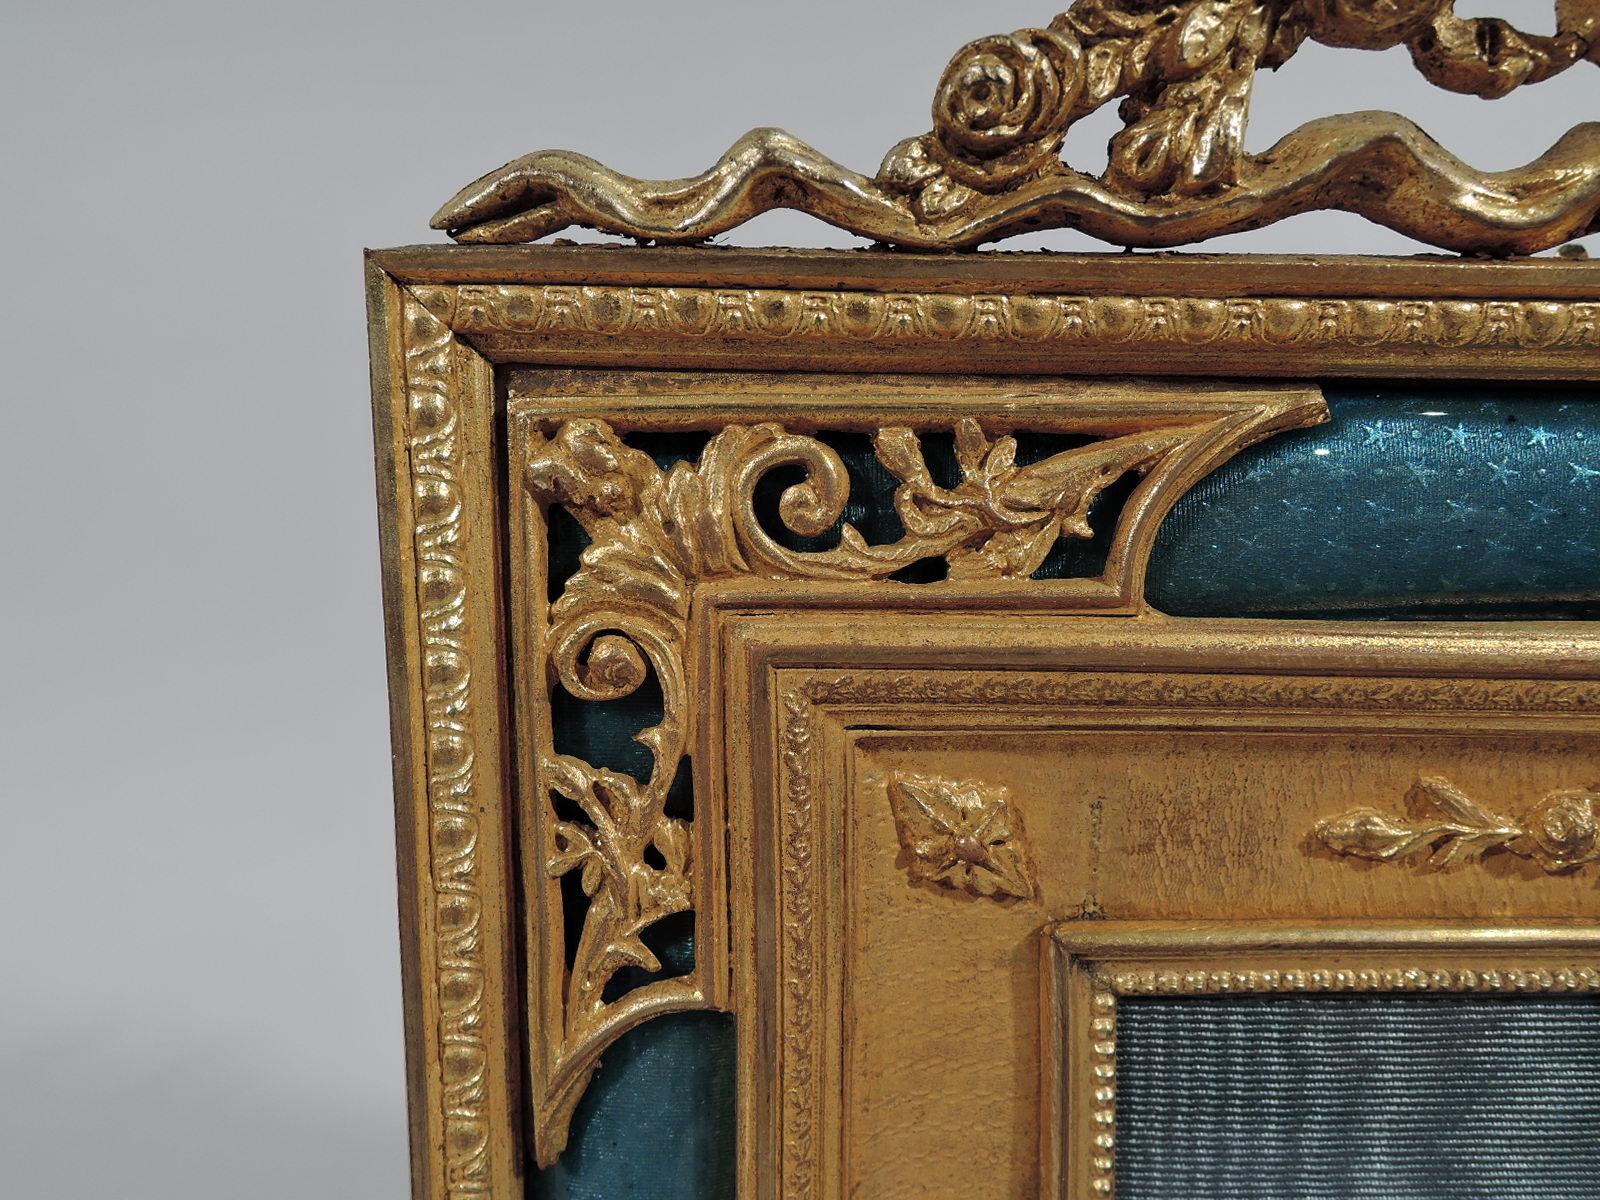 French Rococo Revival gilt bronze and blue enamel picture frame, ca 1900. Rectangular with ribbon-tied floral garland crown. Vertical rectangular window has concave border with applied ribbon-tied garlands and rosettes on wavy ground, in turn